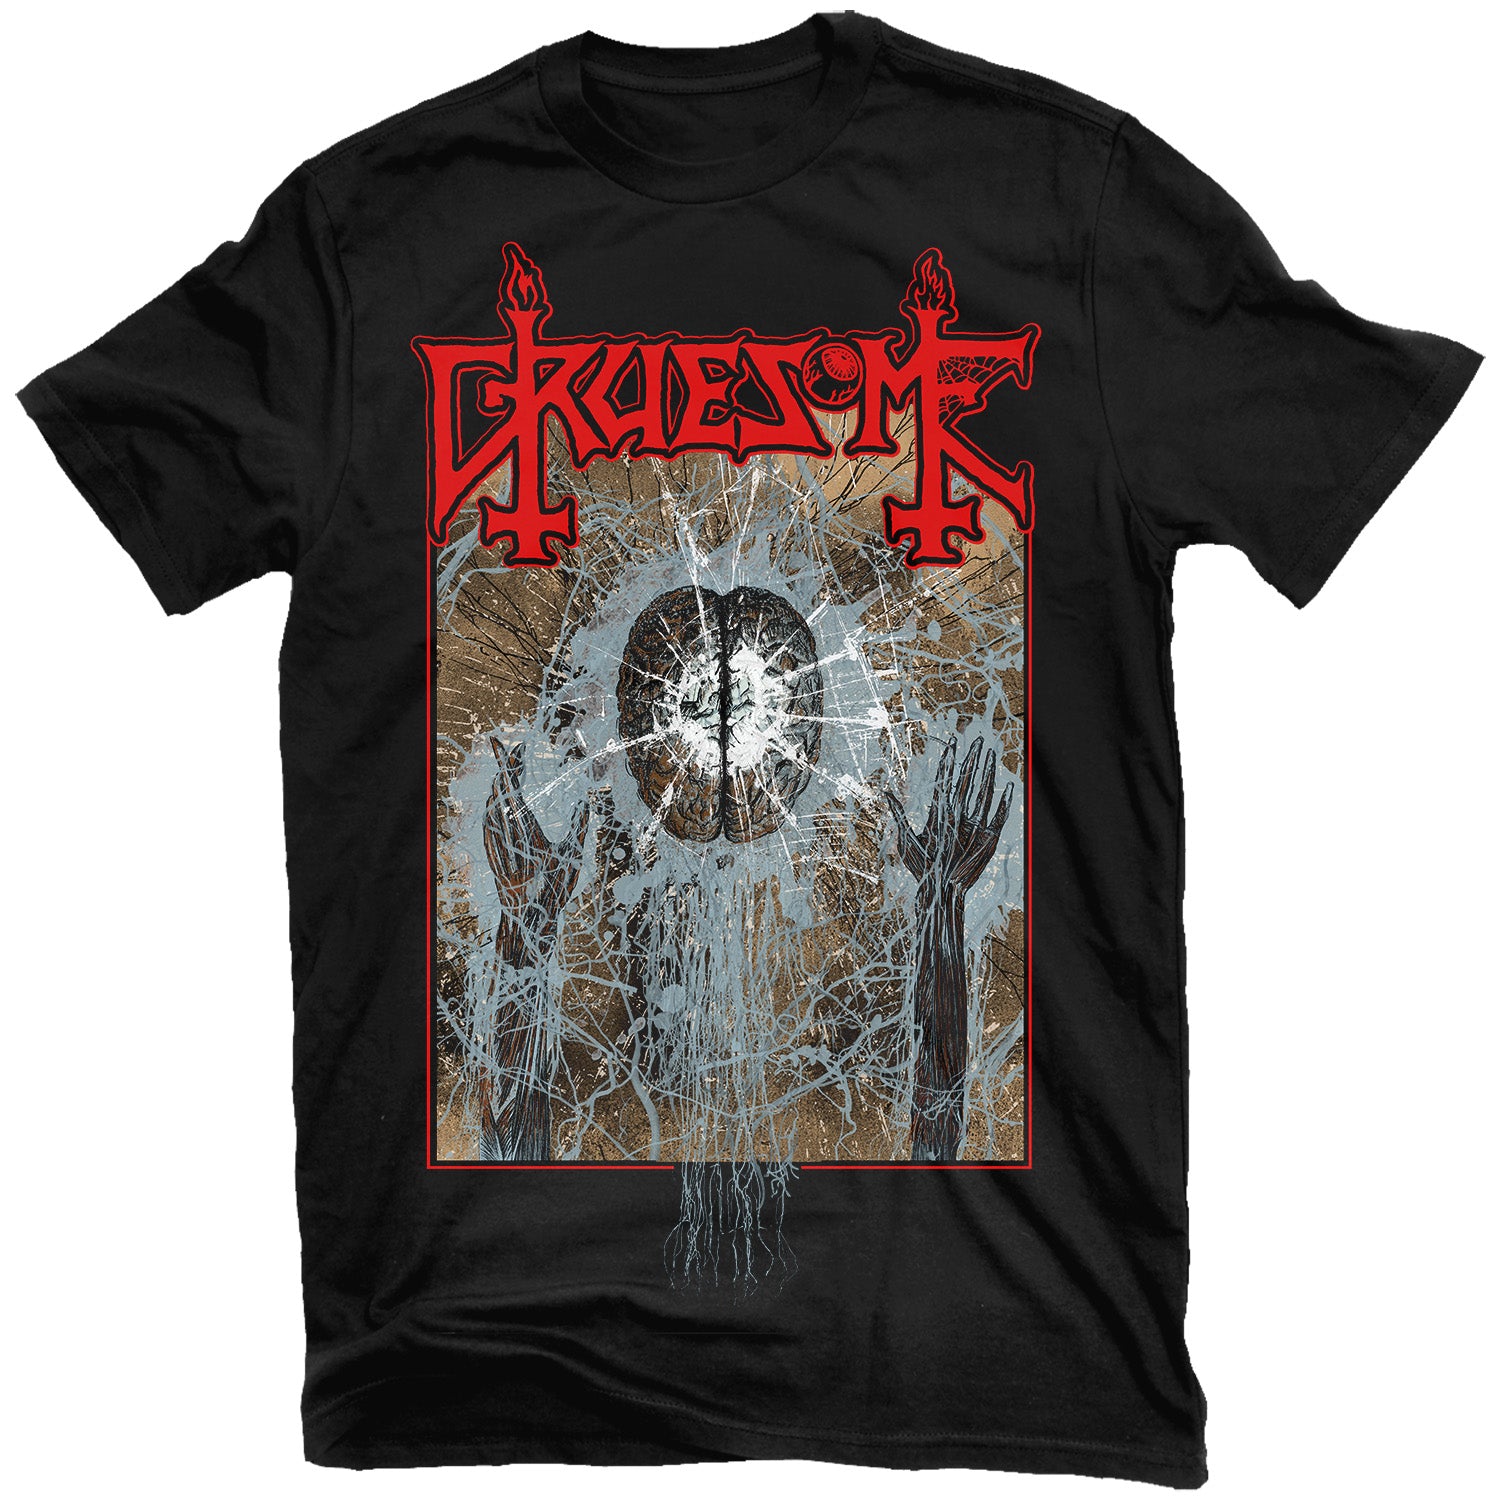 Gruesome "Fragments of Psyche" T-Shirt